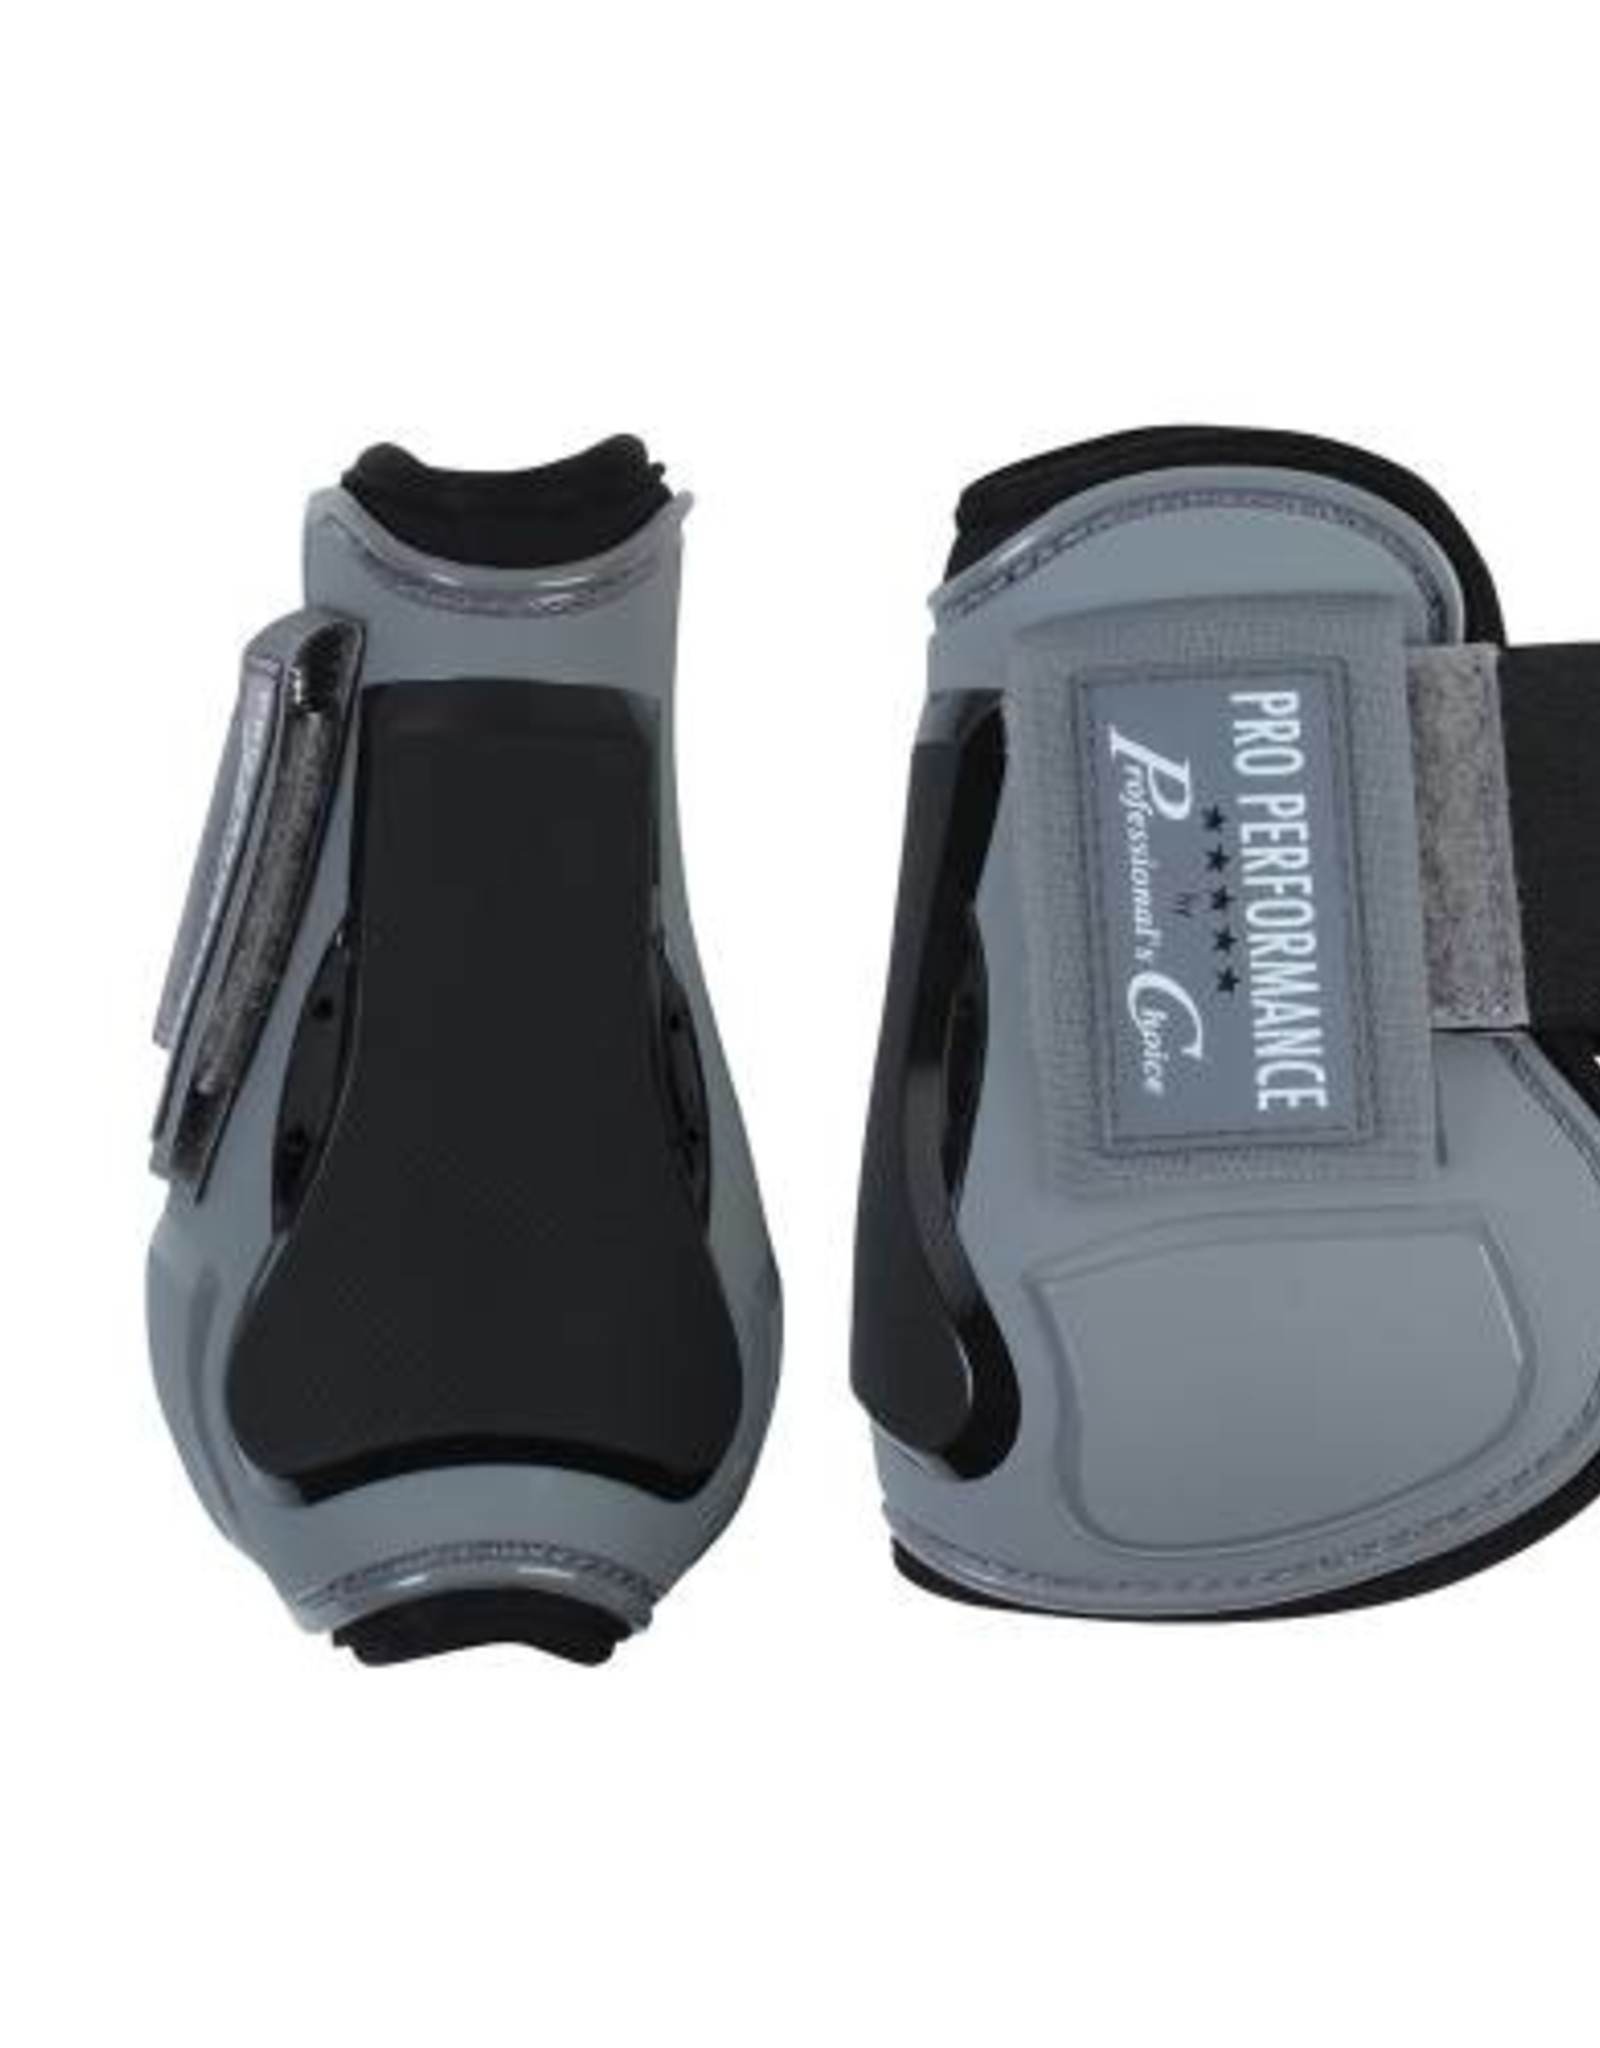 PROFESSIONAL'S CHOICE OPEN FRONT REAR BOOTS